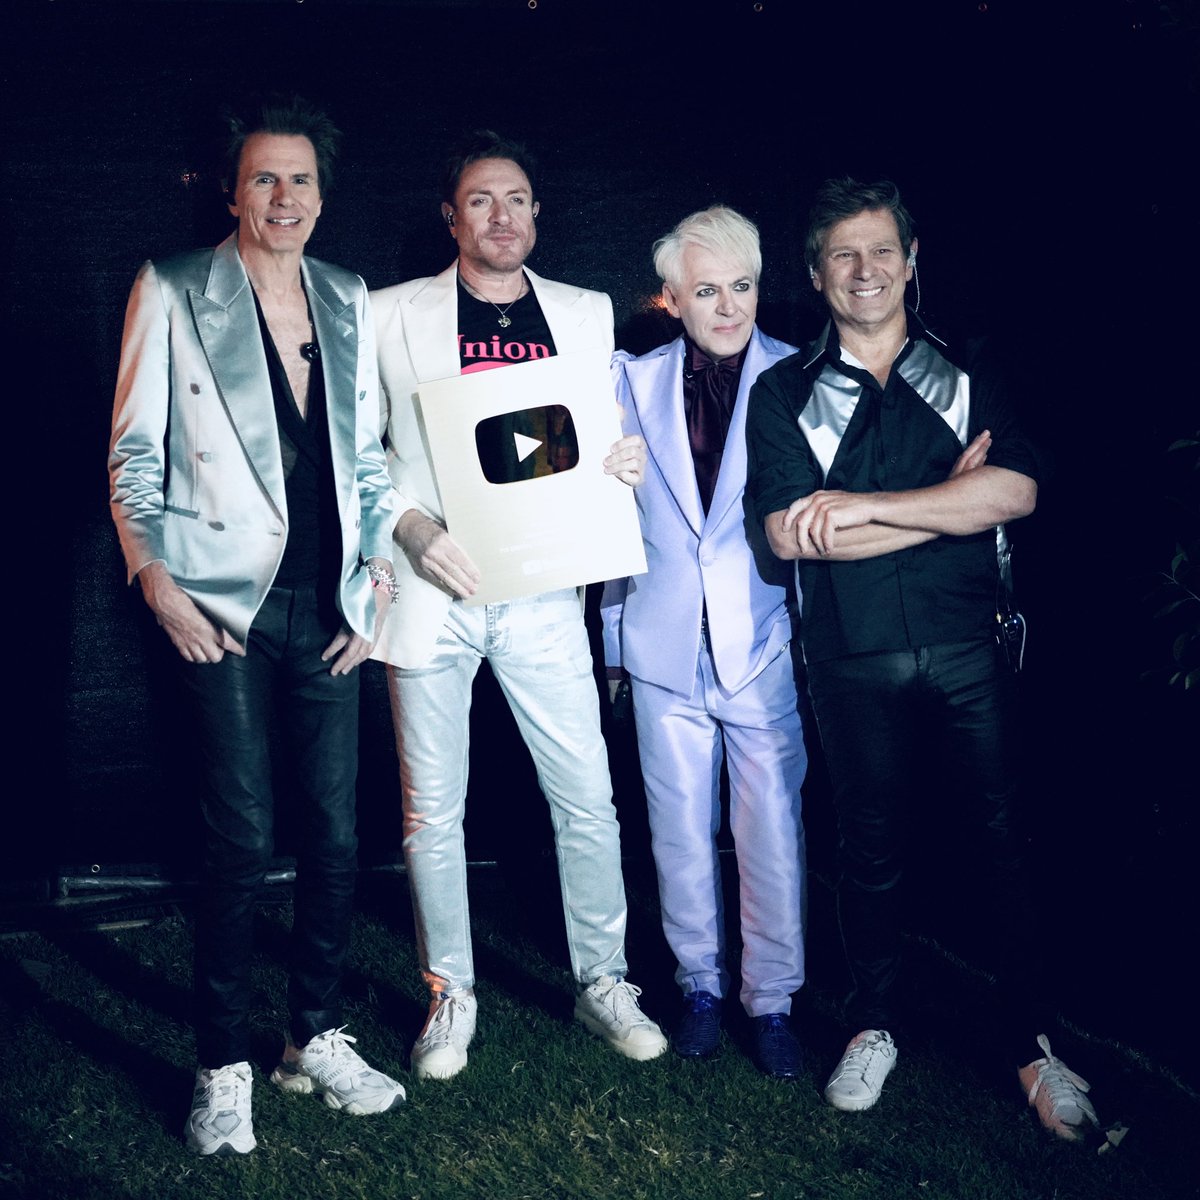 Last night the band was presented with a Creator Award after reaching 1 Million subscribers on the Duran Duran YouTube channel. Thank you to everyone who has helped the guys reach this milestone!